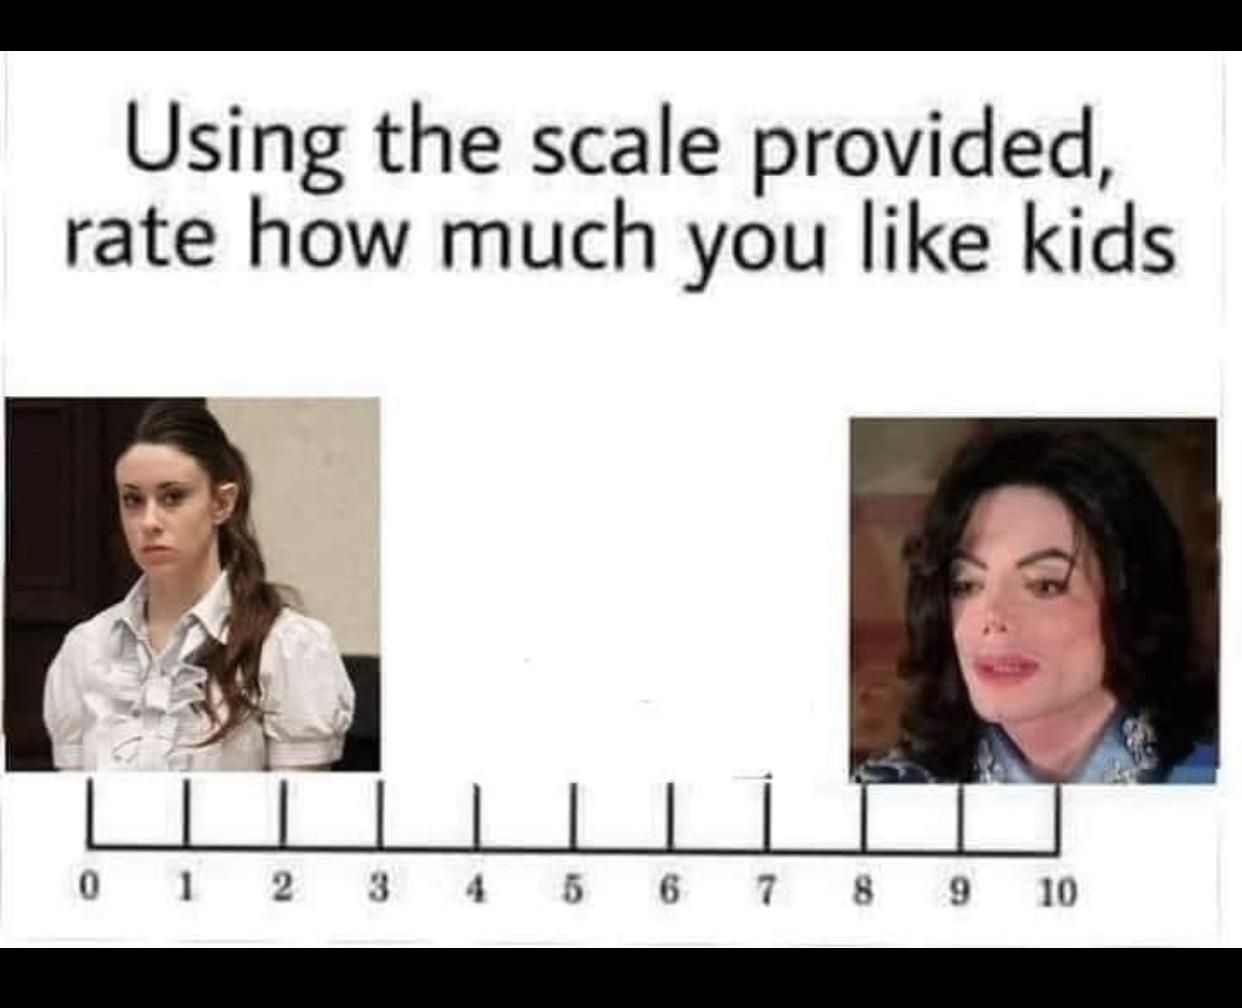 Scales are important